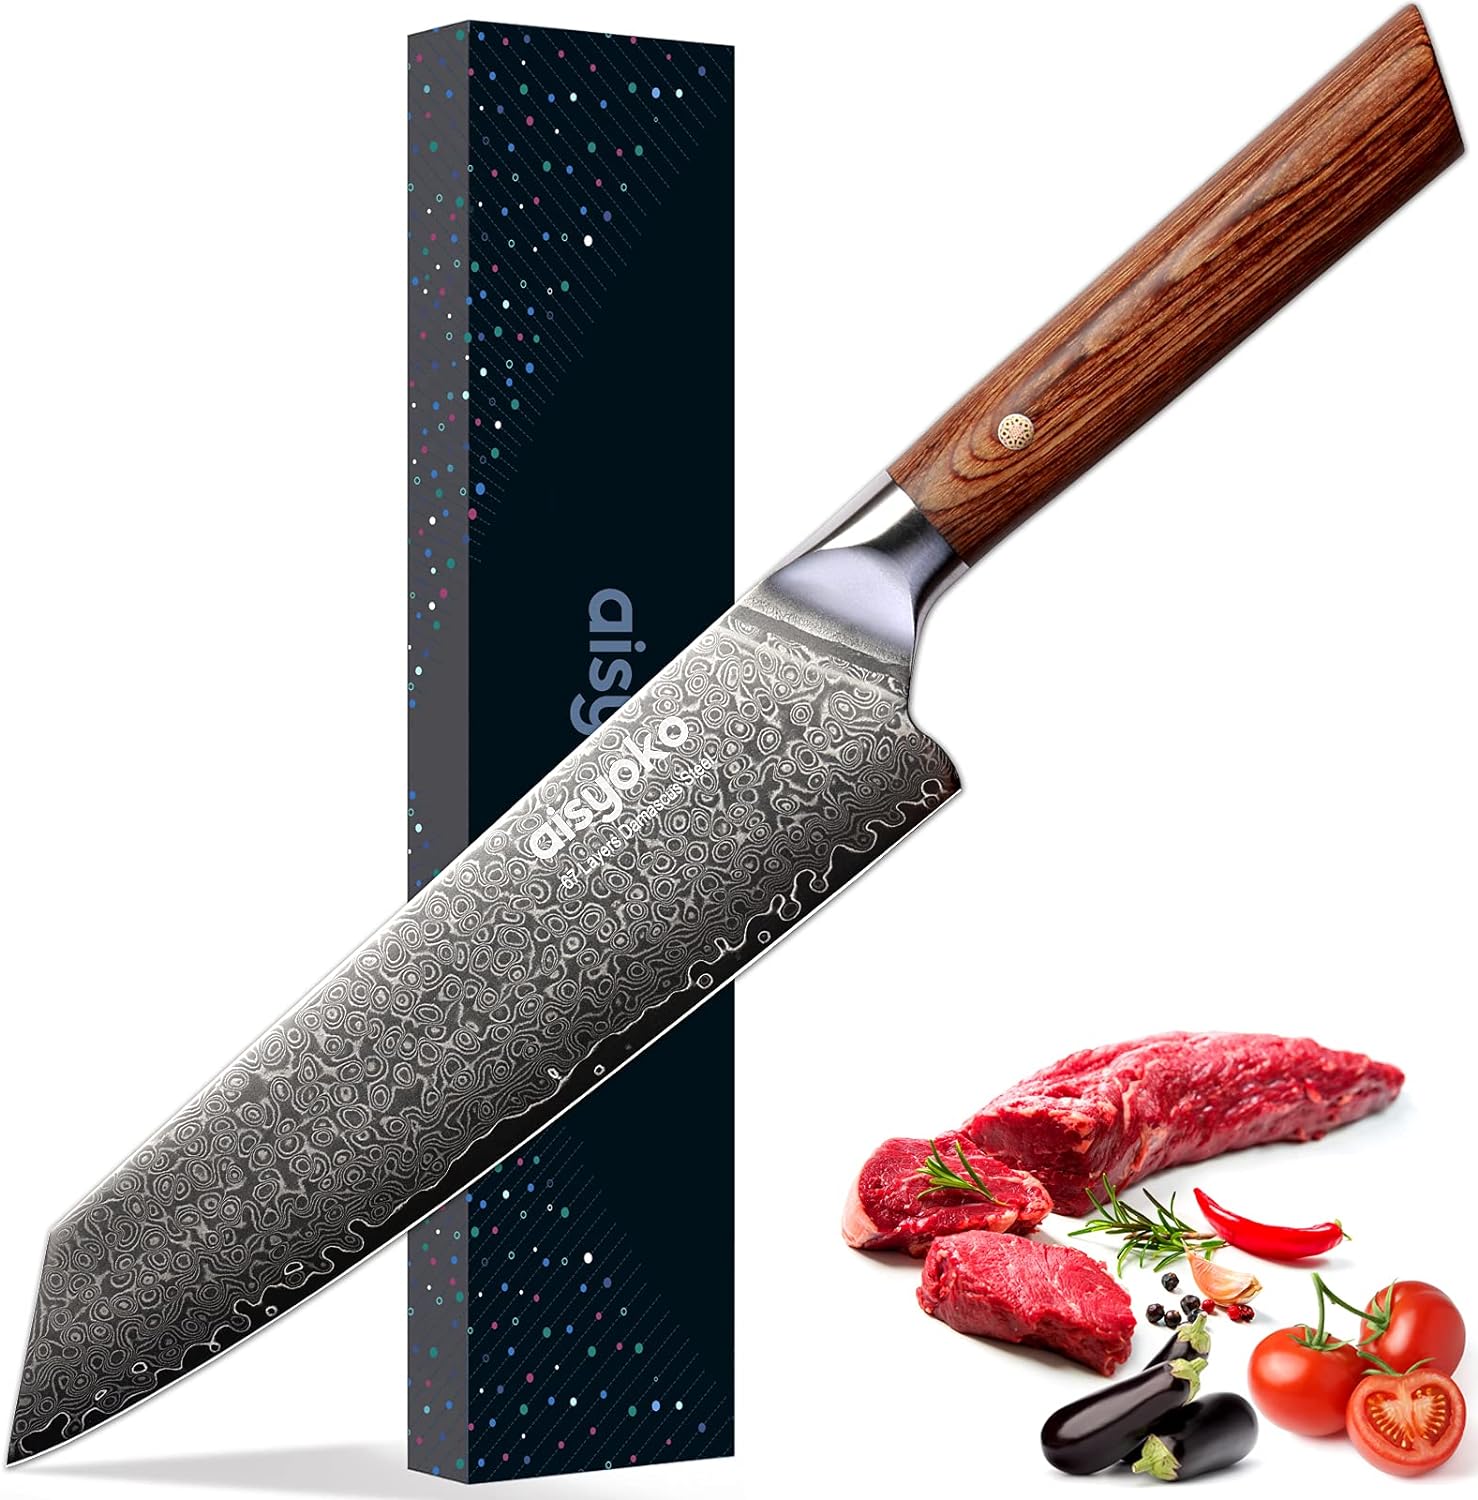 Chef Knife 8 Inch Damascus Japan VG-10 Super Stainless Steel Professional High Carbon Super Sharp Kitchen Cooking Knife